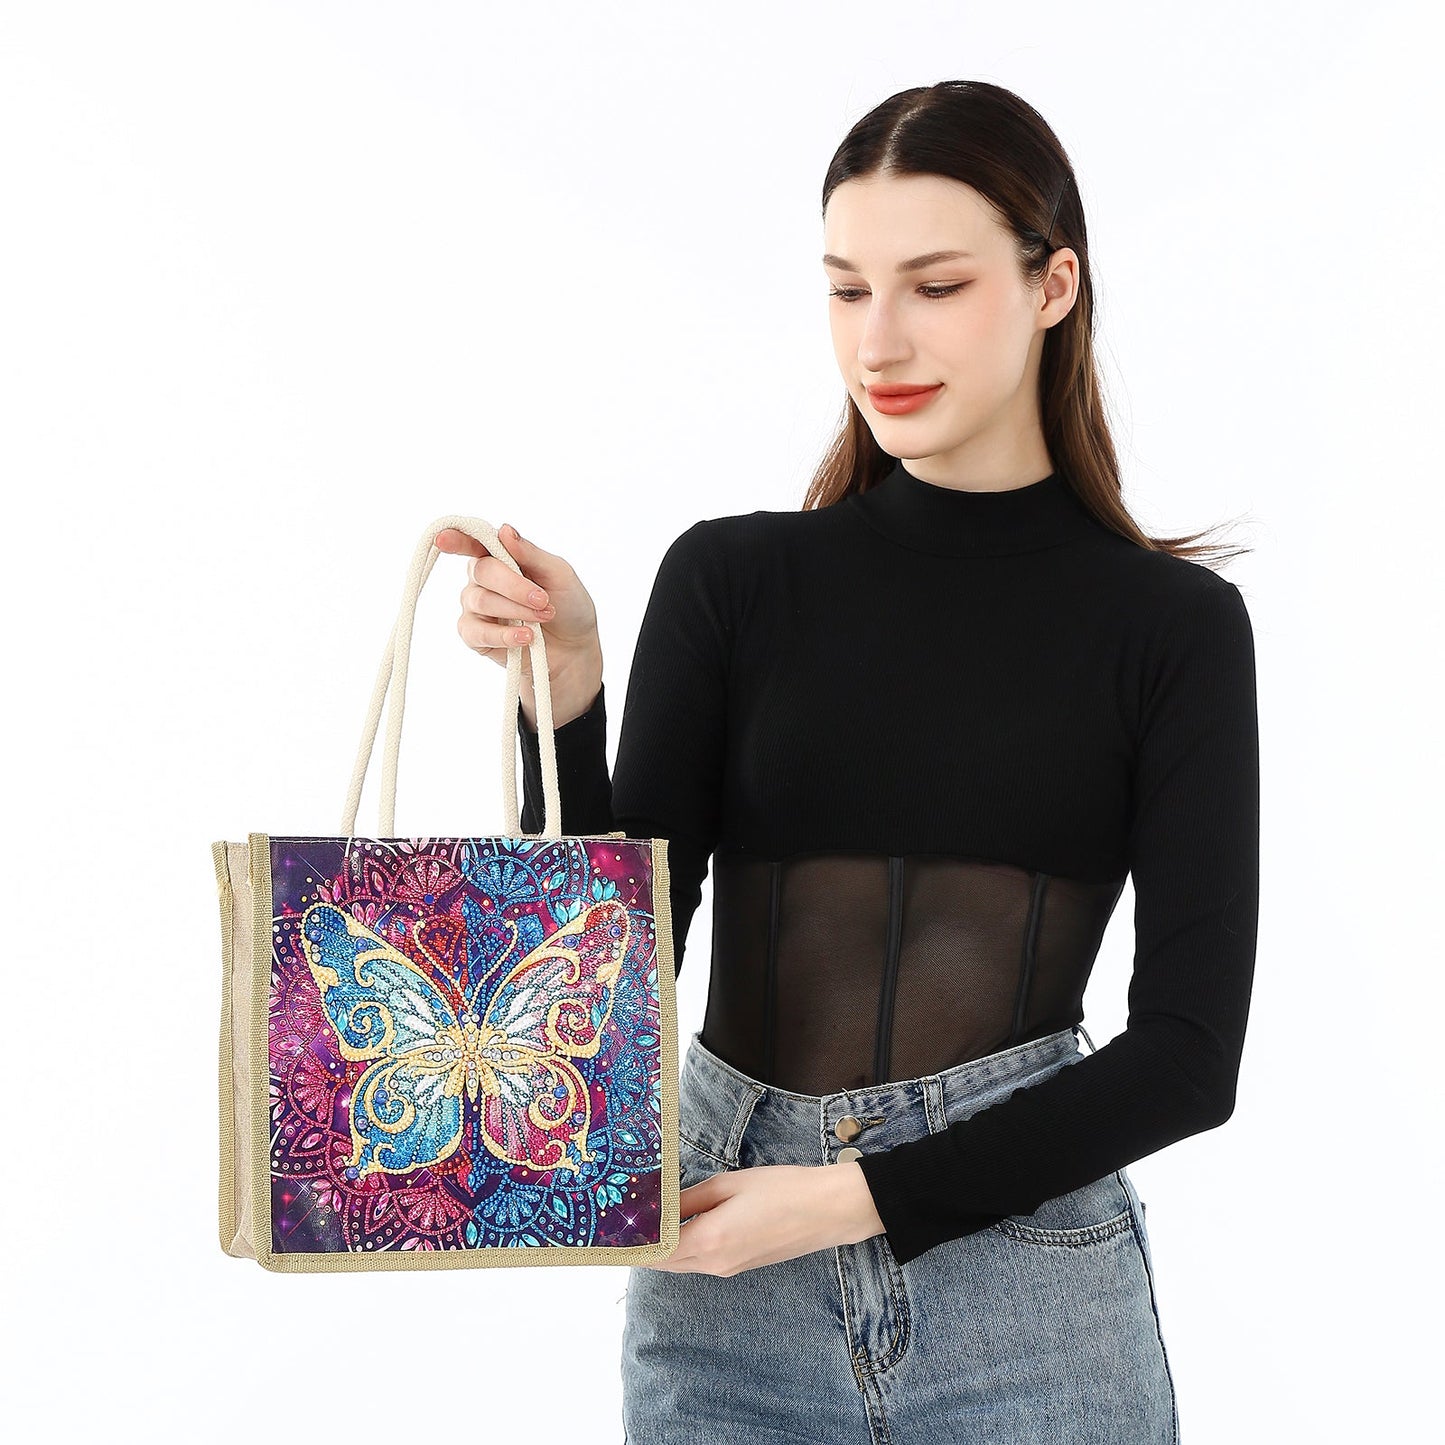 Vintage Butterfly - Diamond Painting Shopping Bag